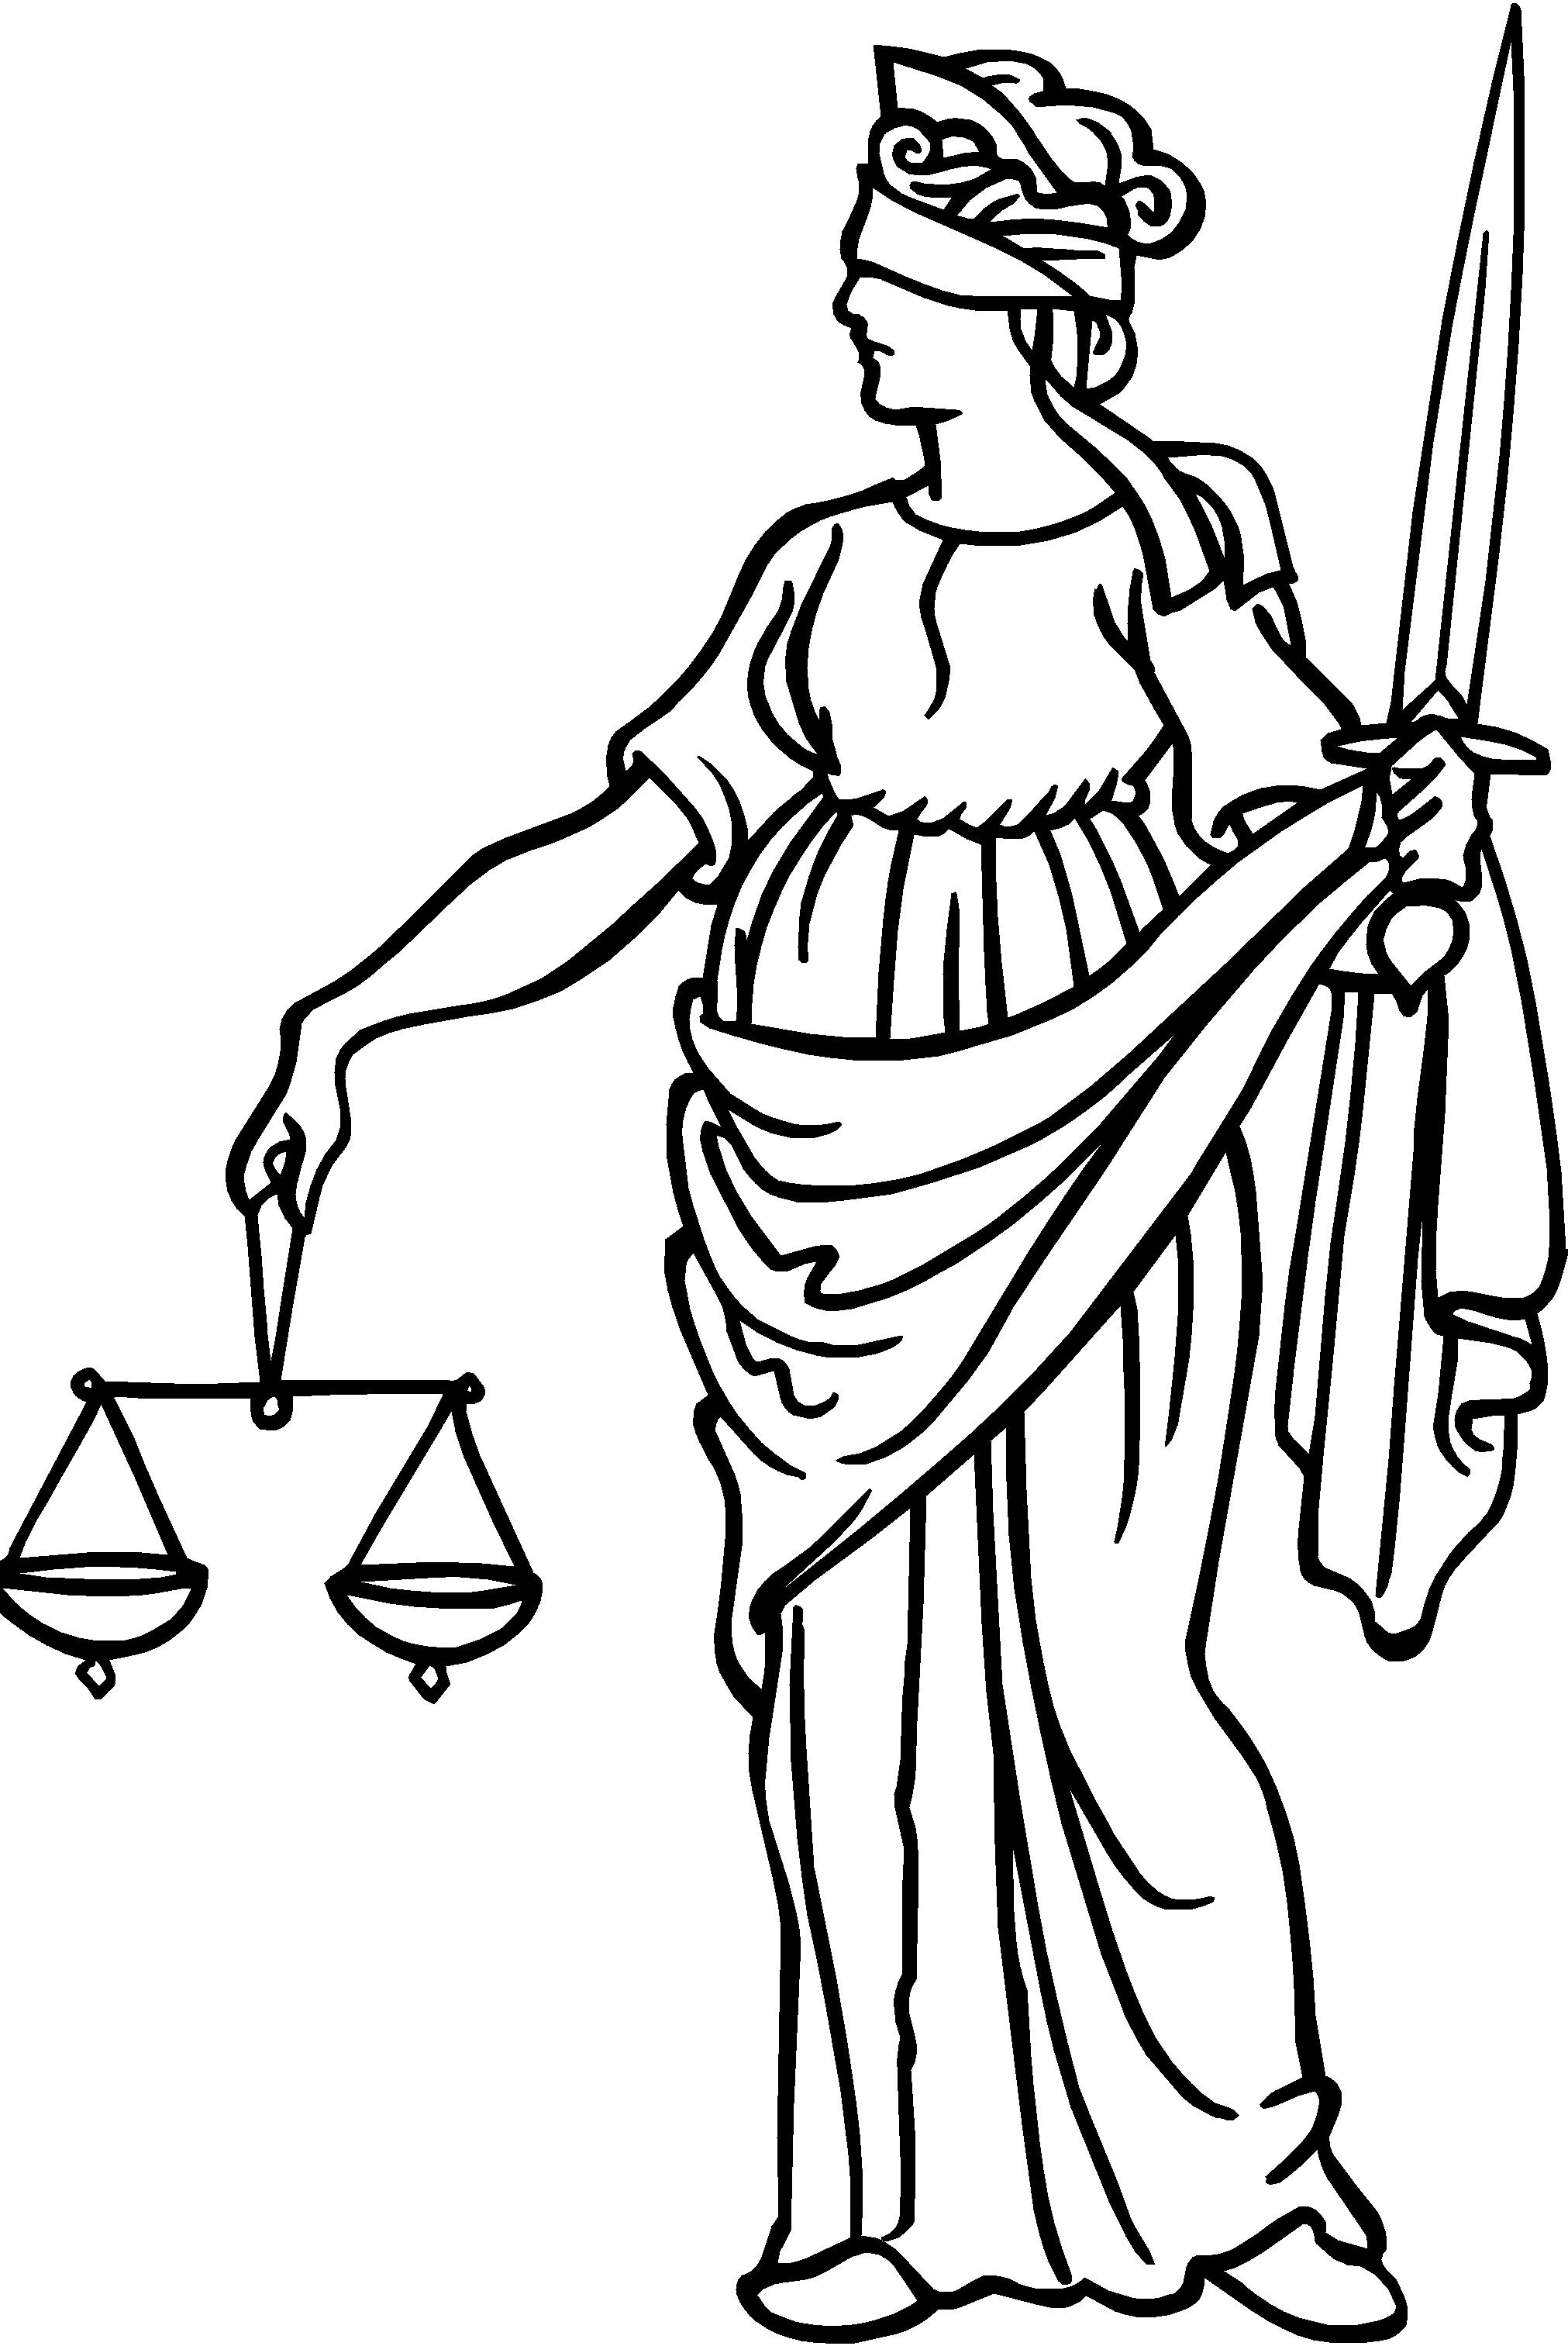 Symbol Of Justice Images - ClipArt Best